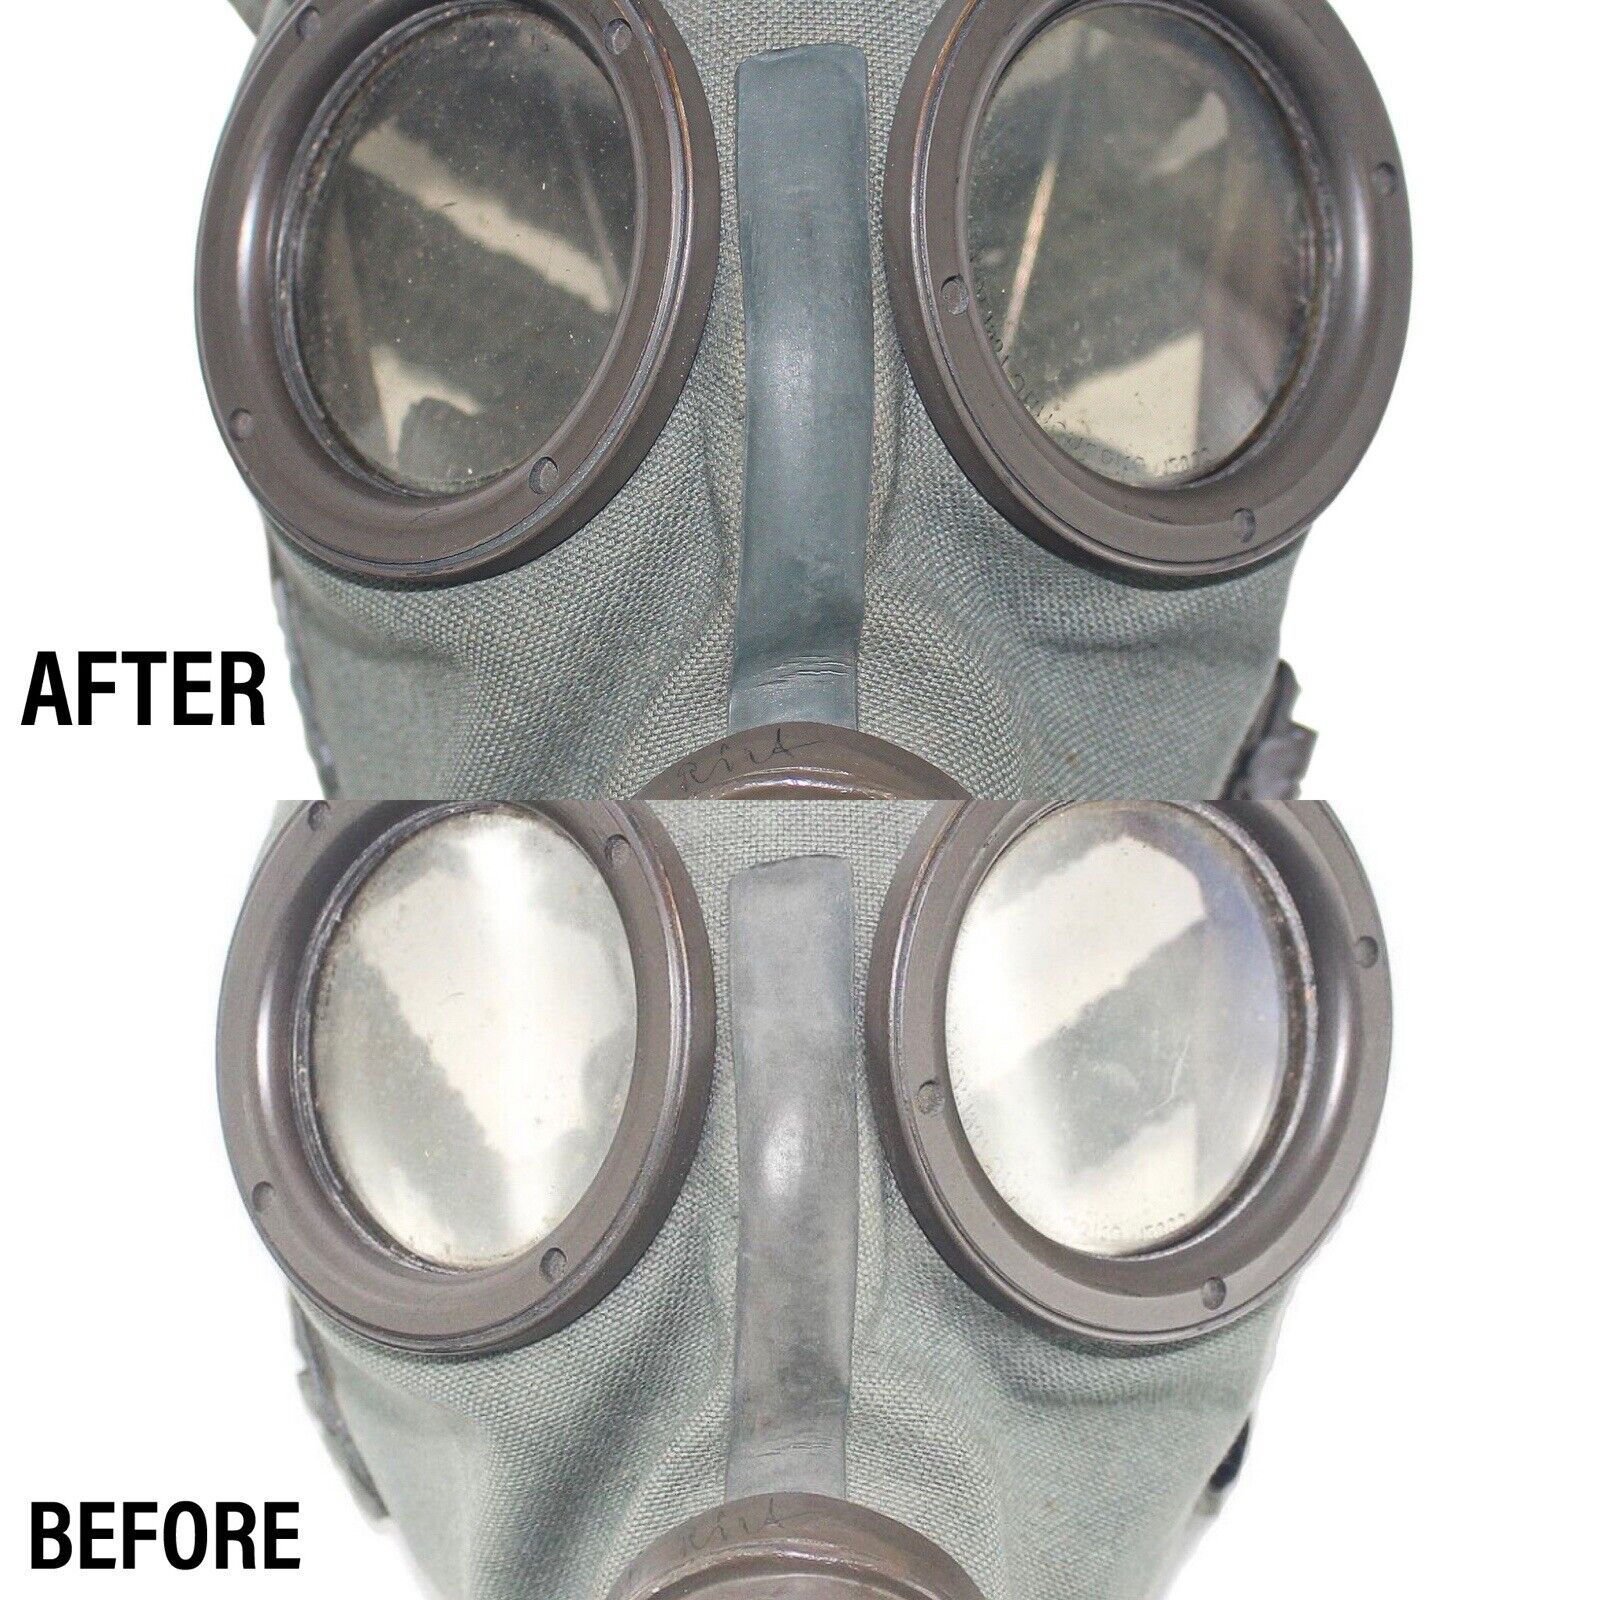 Gas Mask + Allied And Axis Cleaning And Restoration Services 1914-2022